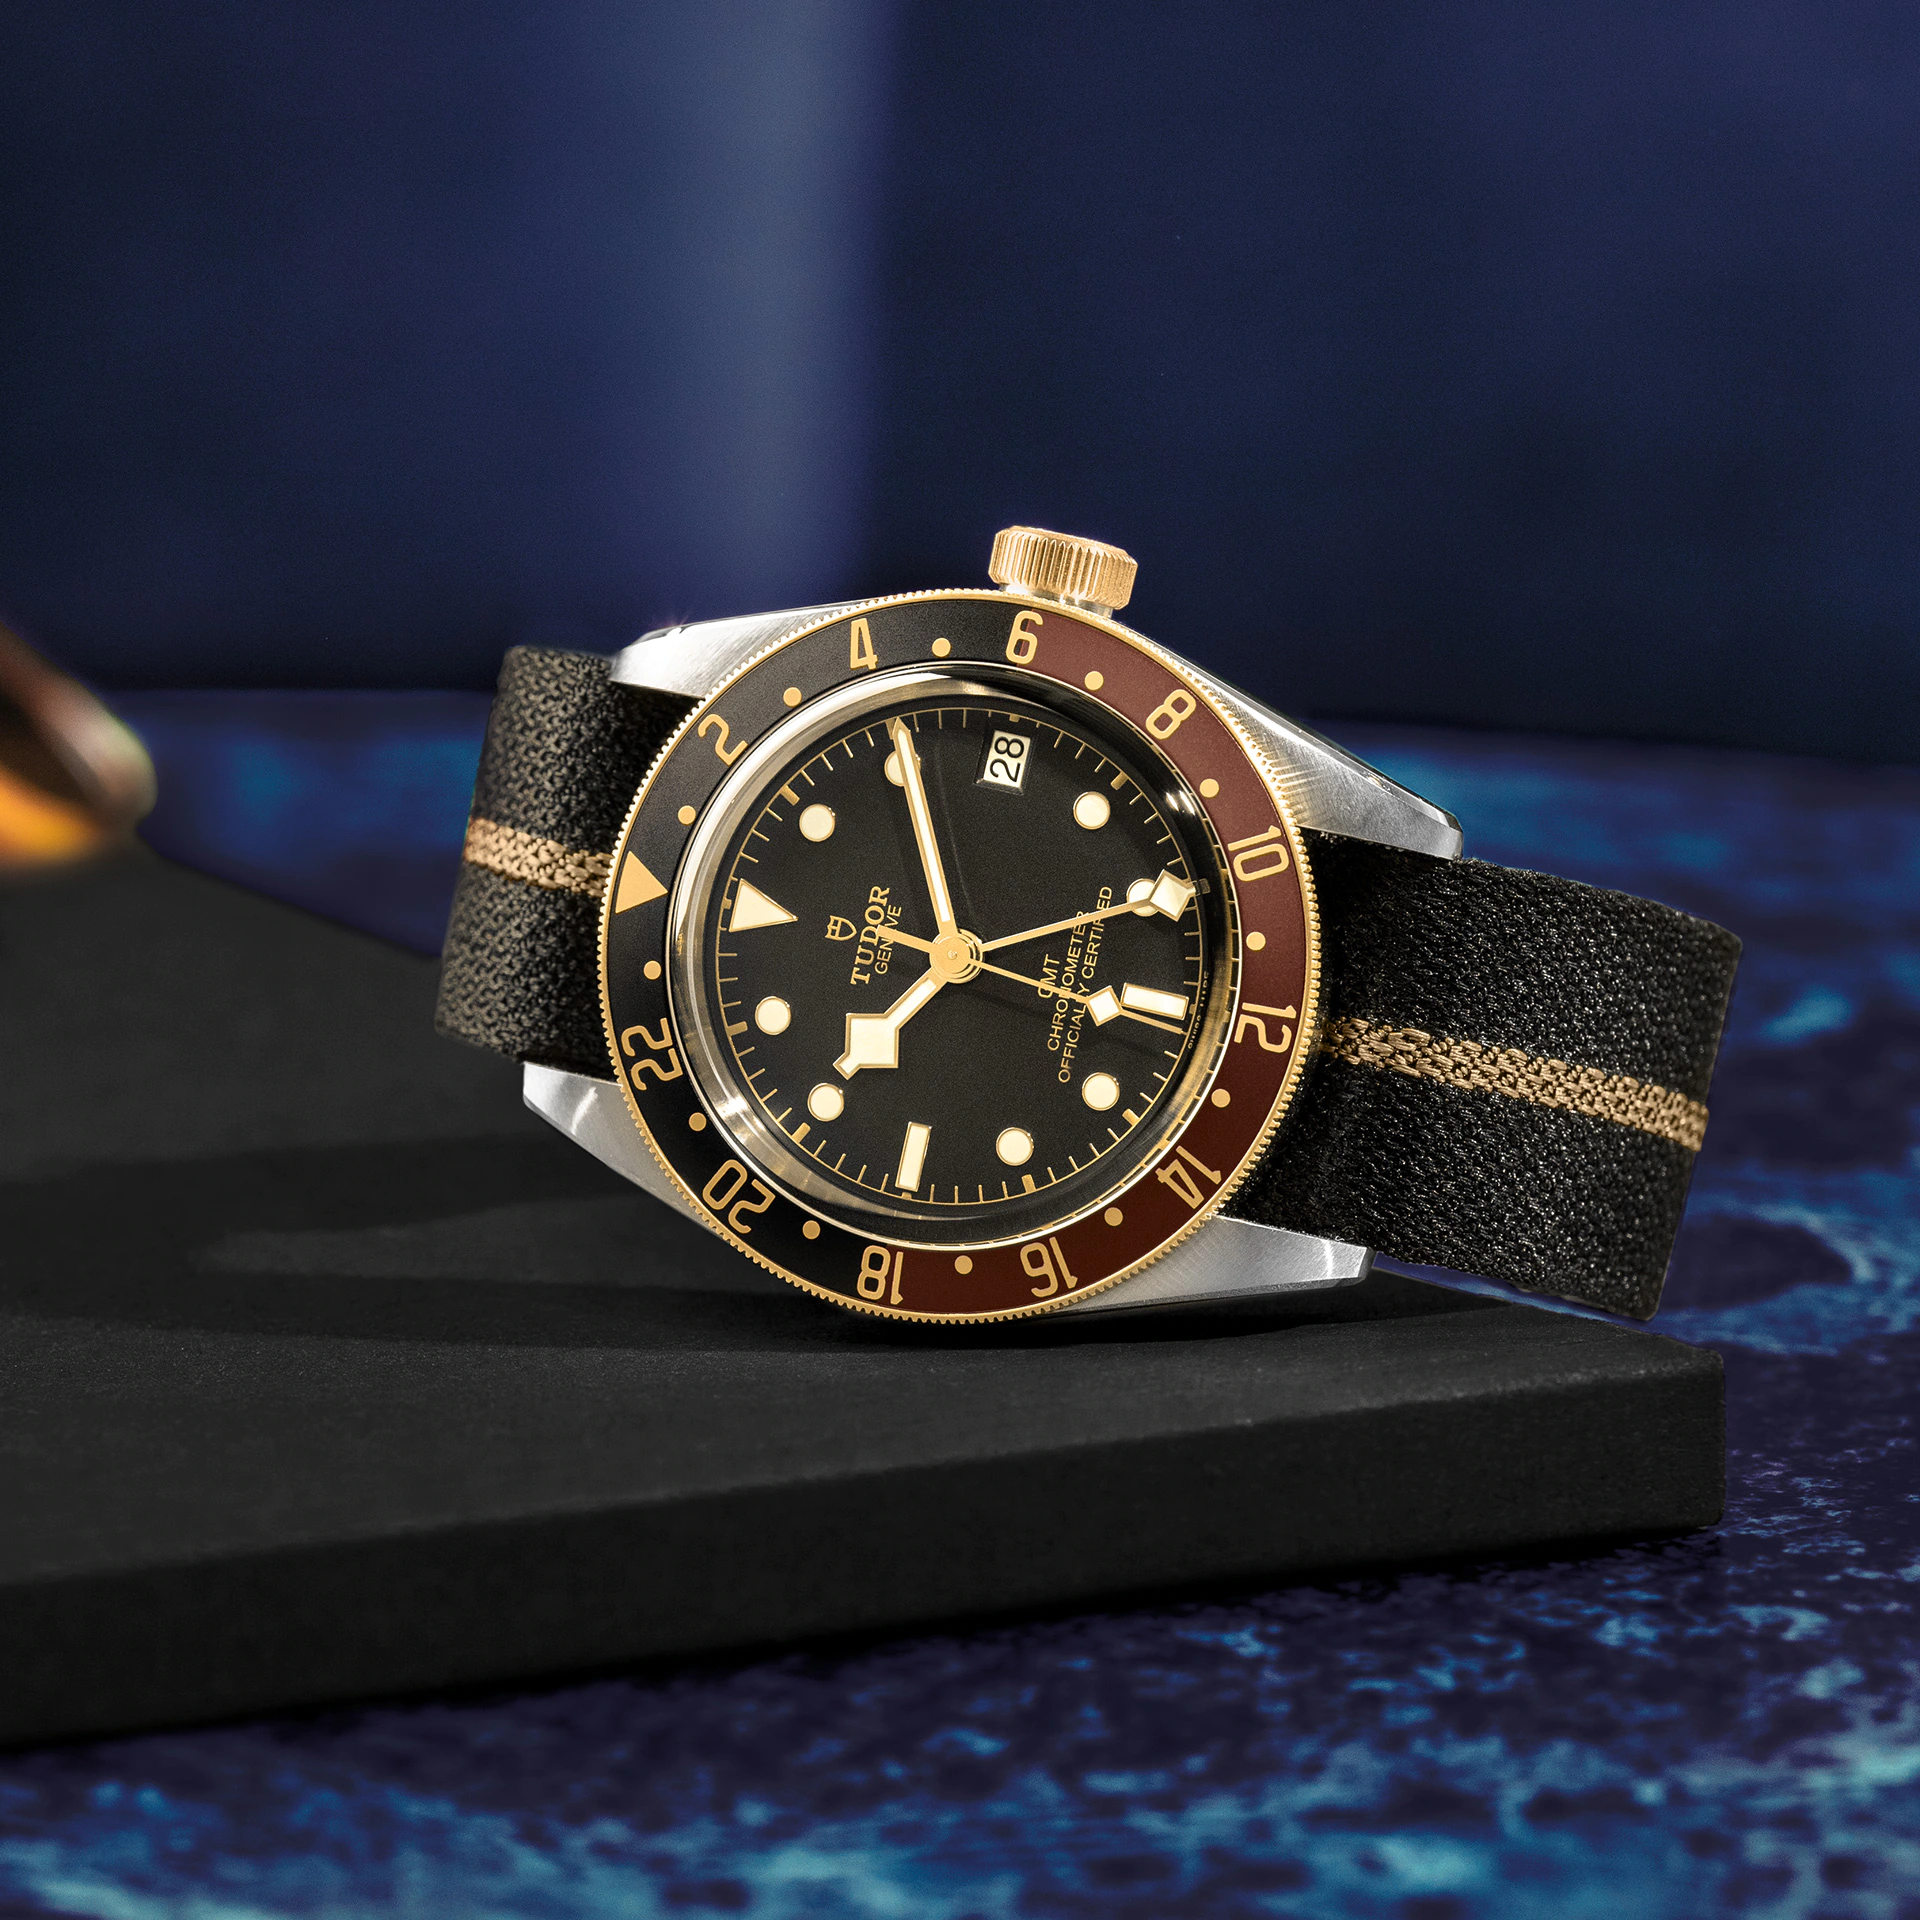 Tudor Black Bay GMT S&G, Stainless Steel and 18k Yellow Gold, 41mm, Ref# M79833MN-0004, Main view